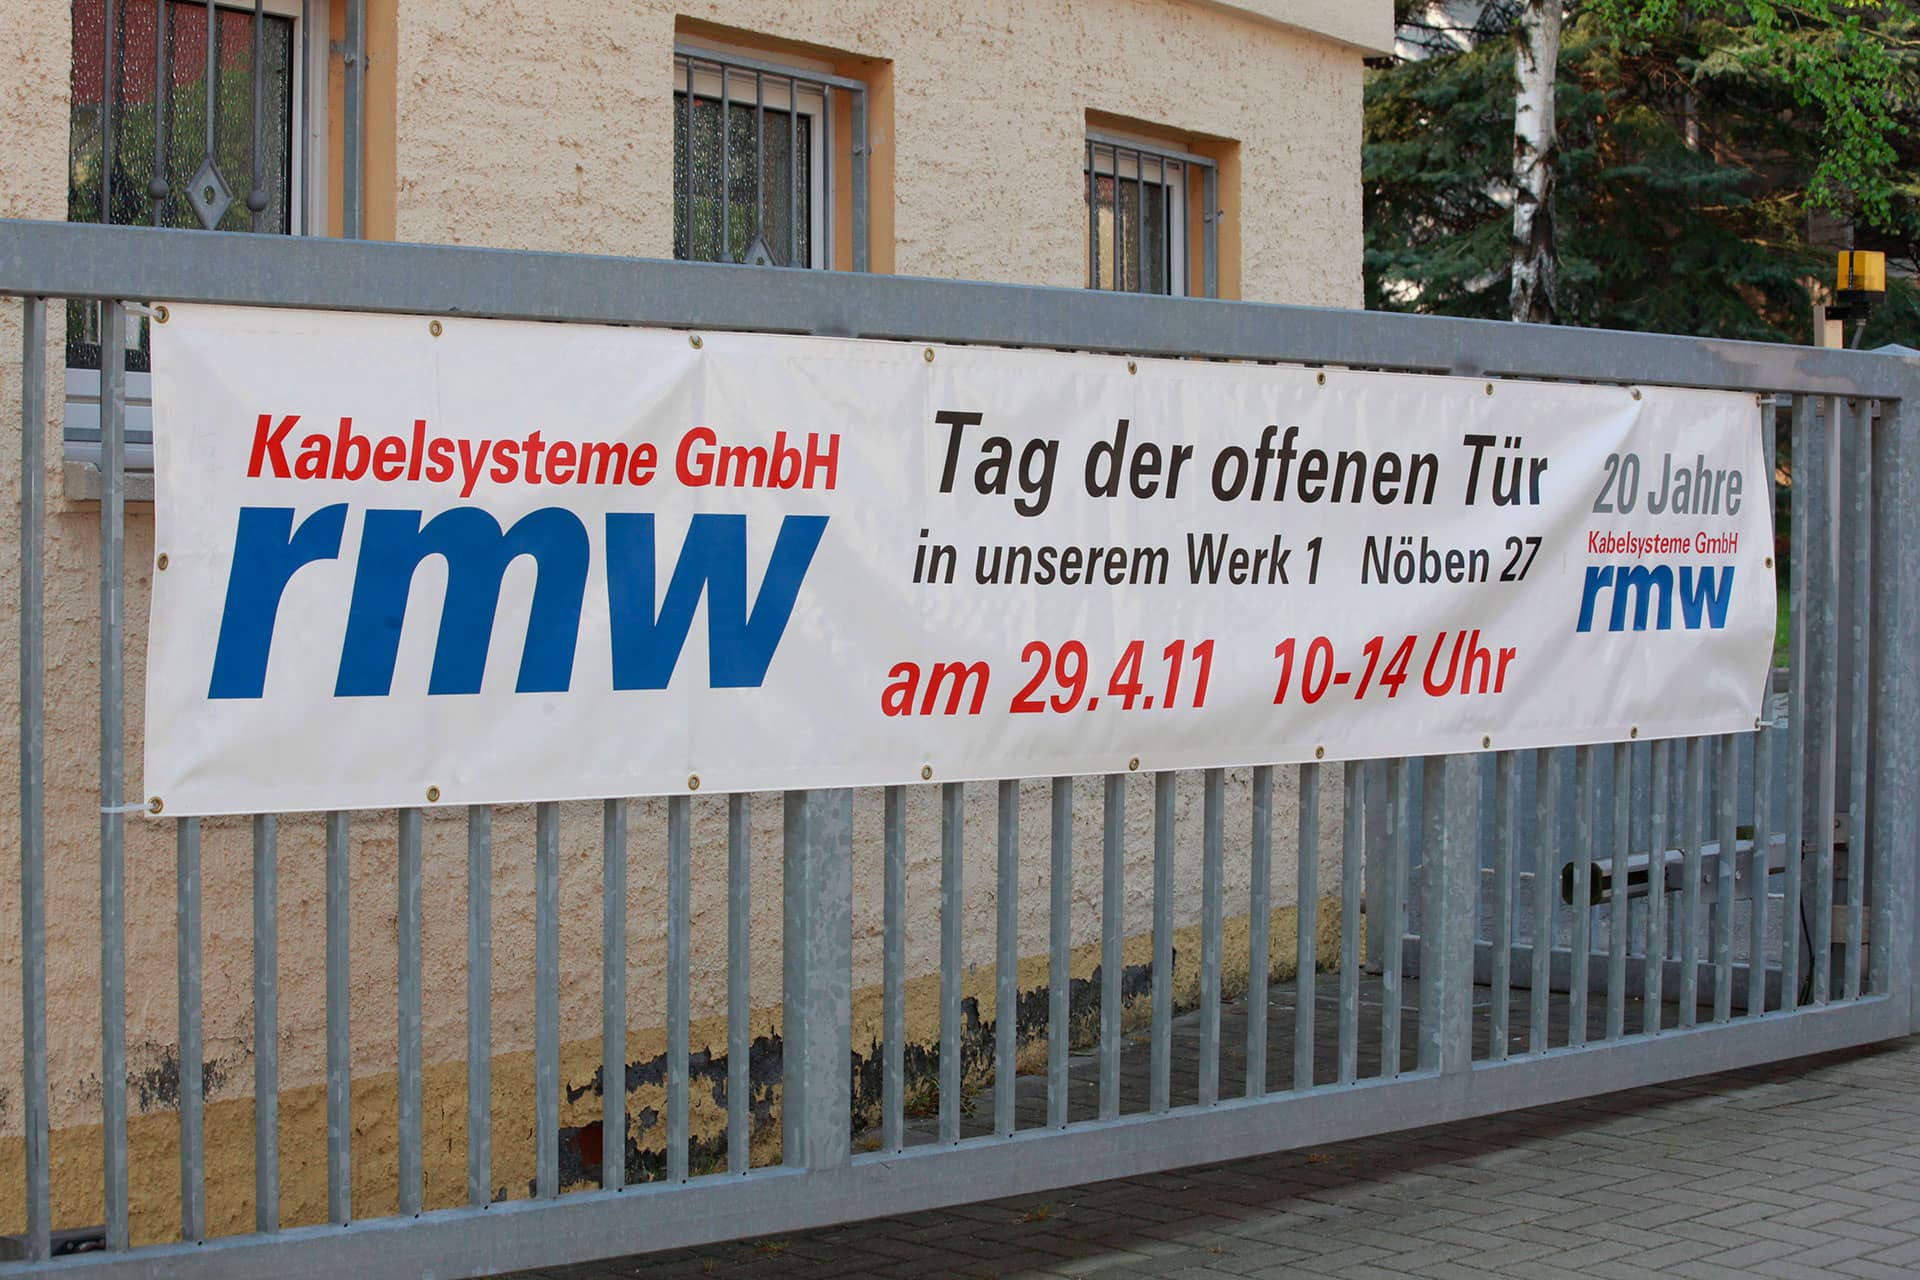 View of banner on fence: rmw invites to open day